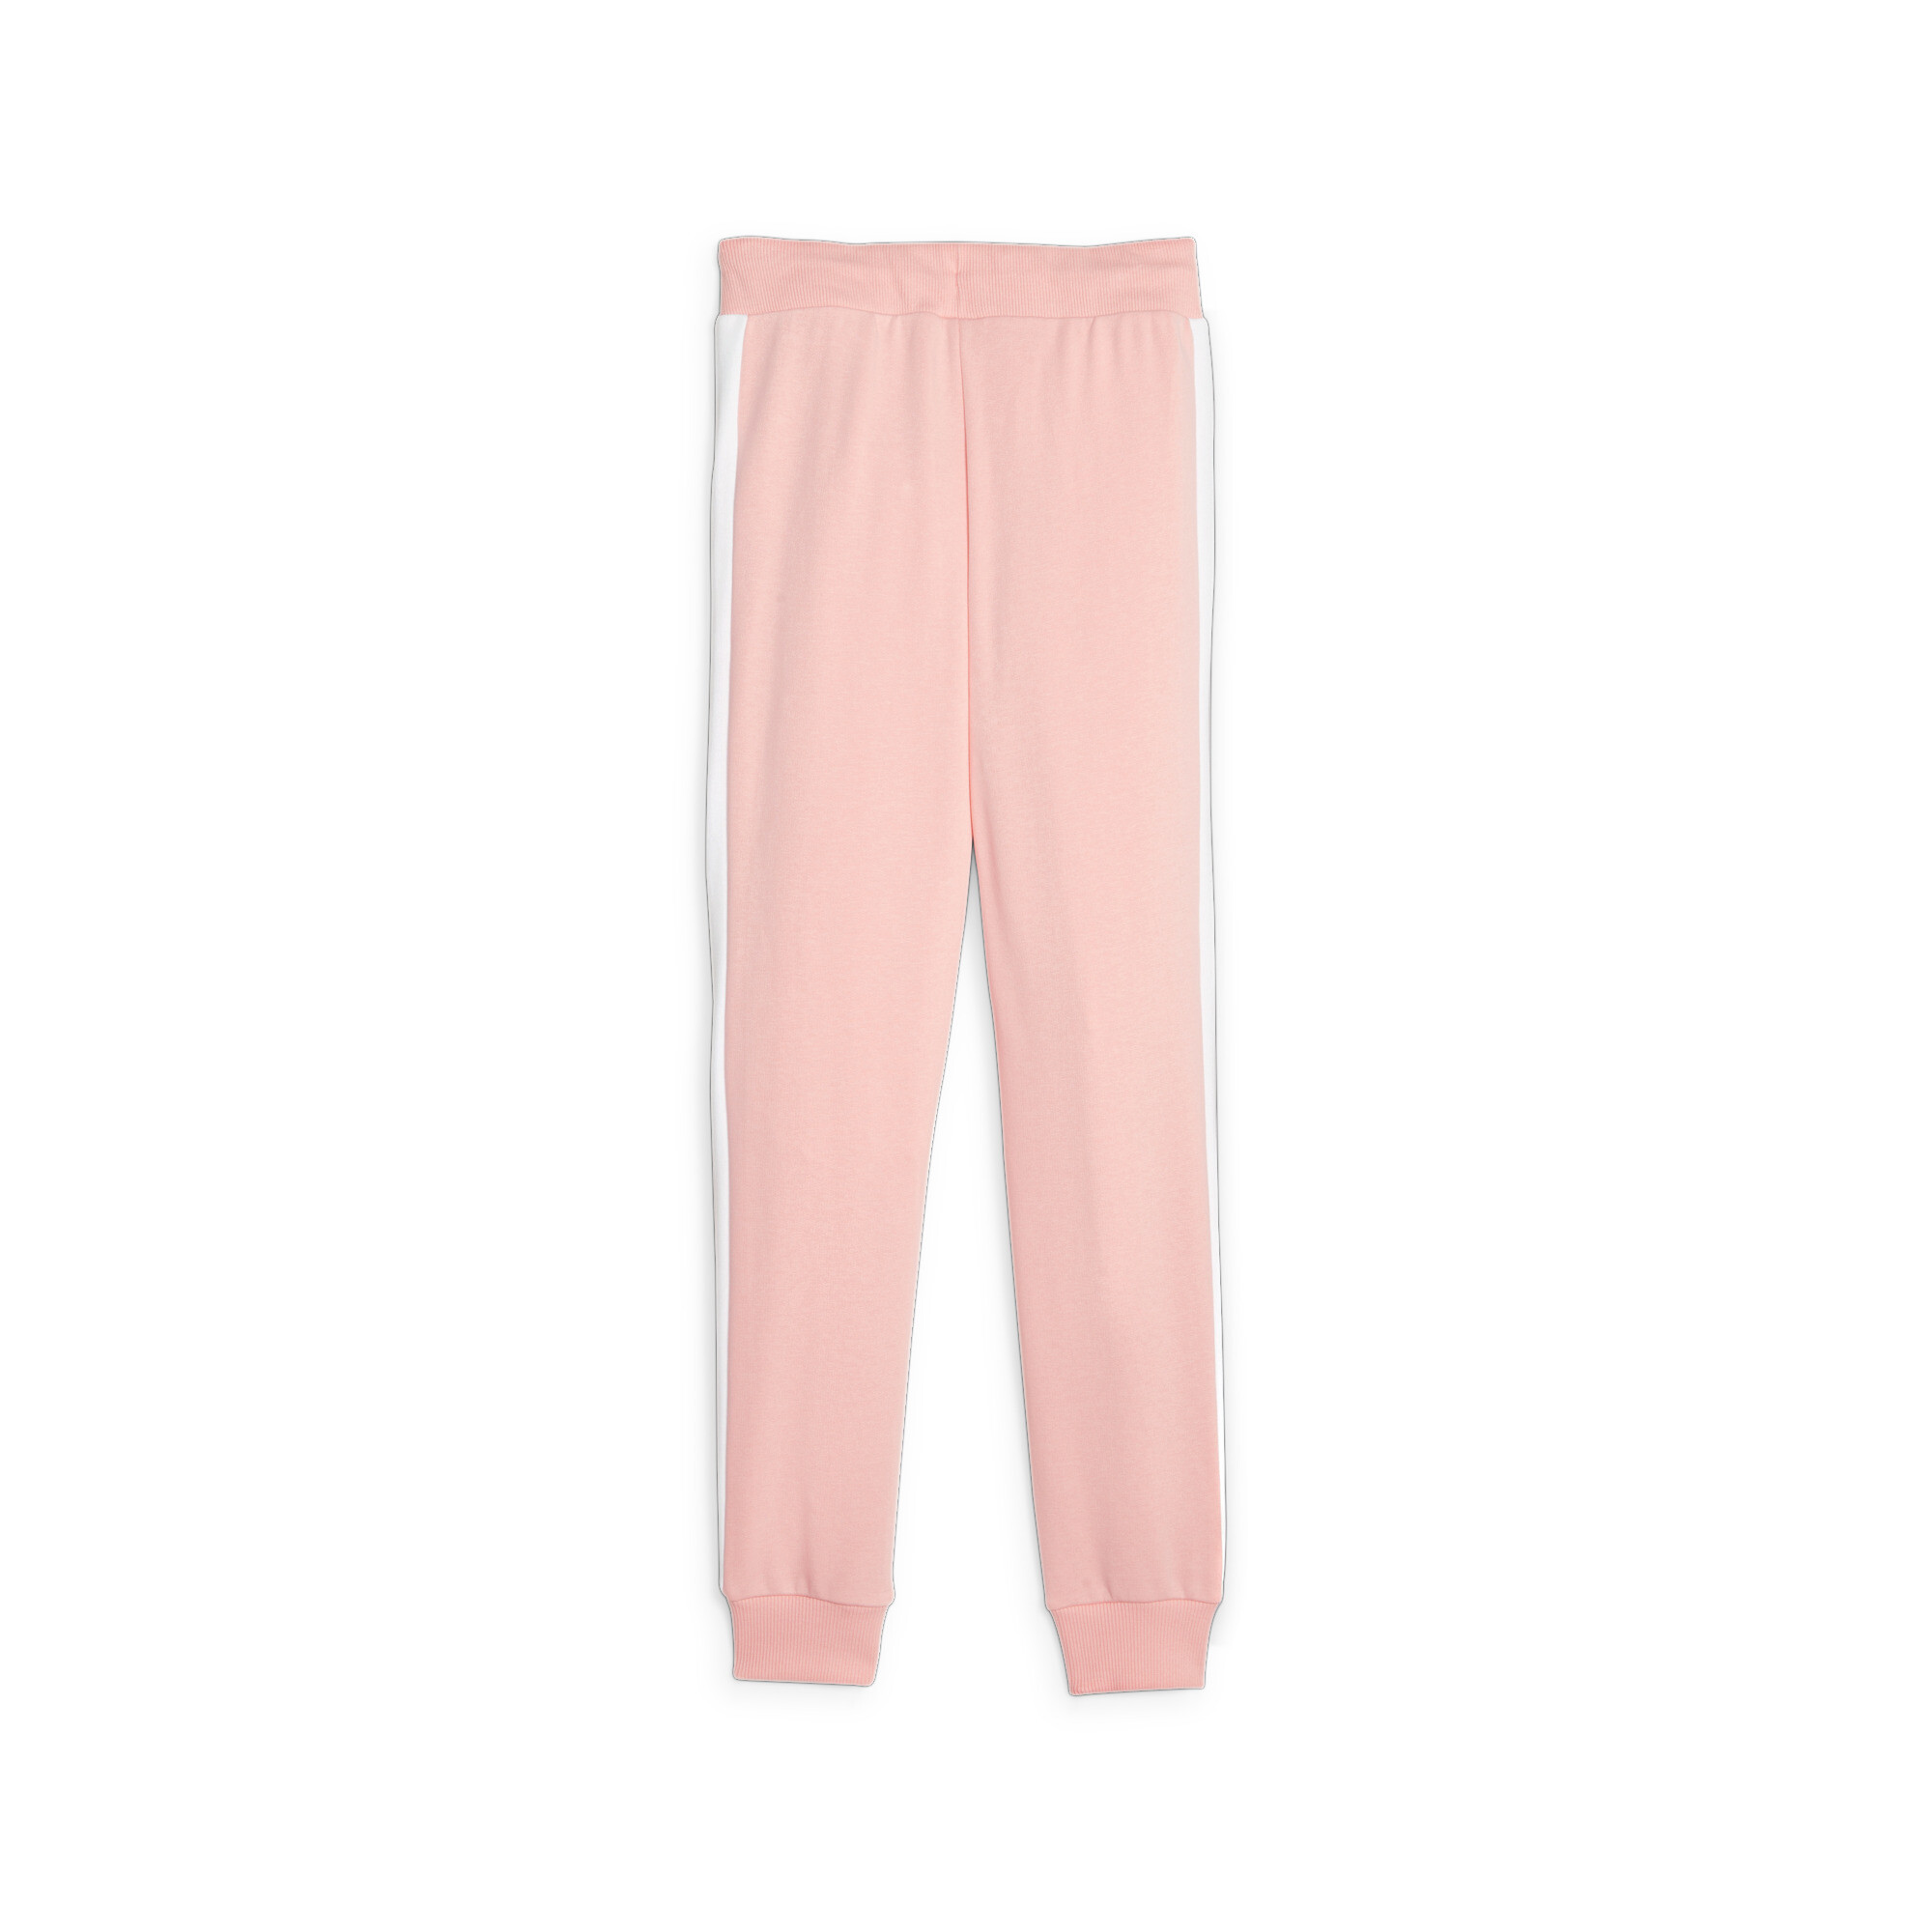 PUMA Classics T7 Track Pants In Pink, Size 3-4 Youth